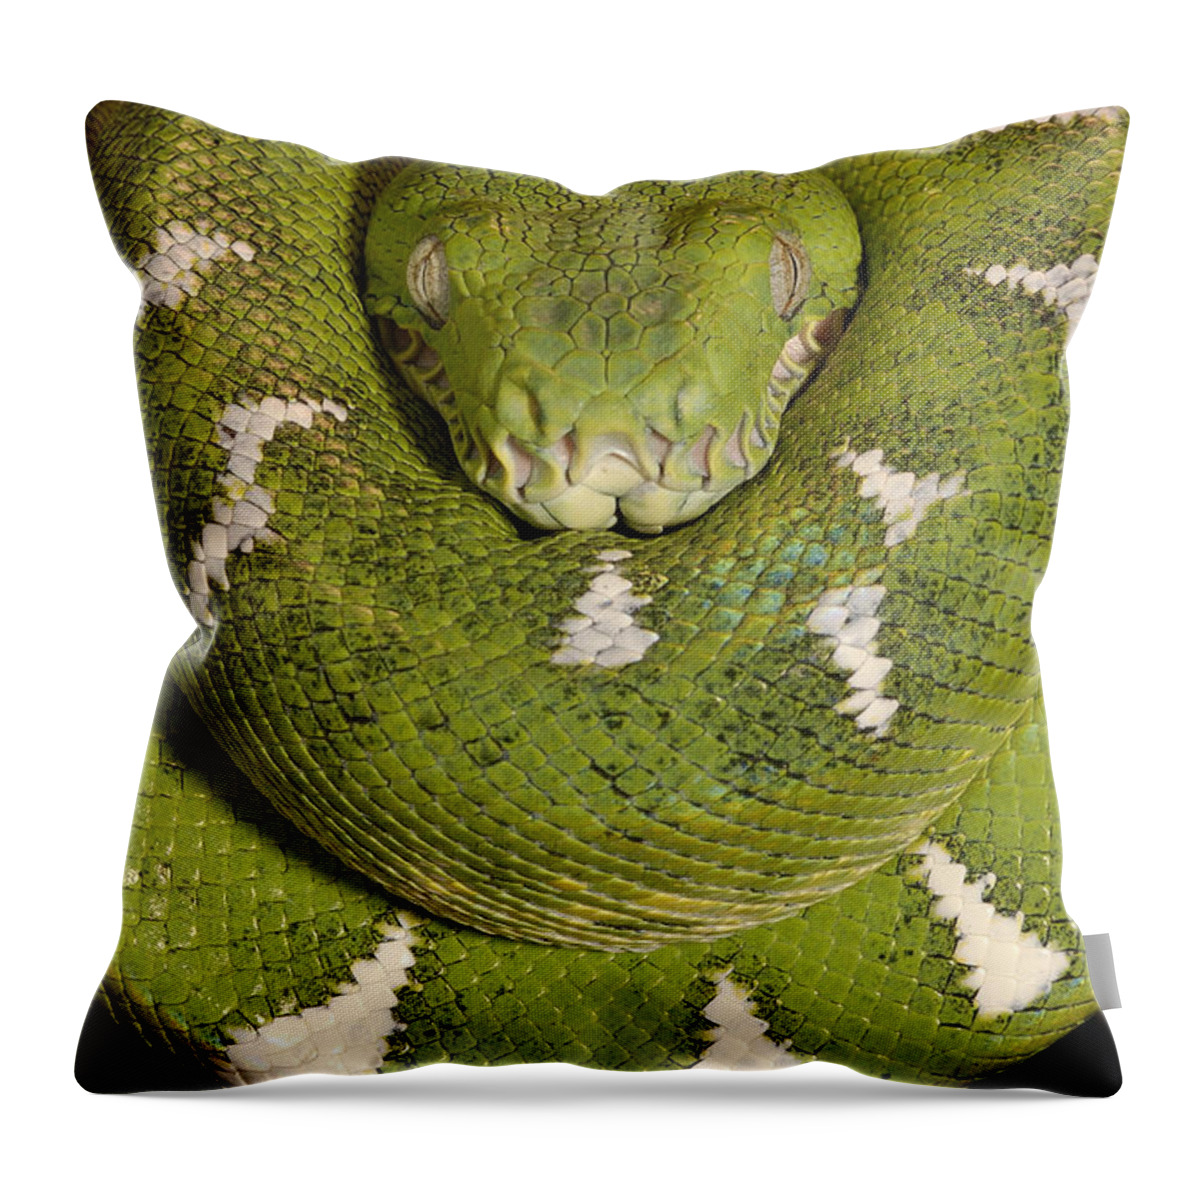 Mp Throw Pillow featuring the photograph Emerald Tree Boa Corallus Caninus #1 by Pete Oxford